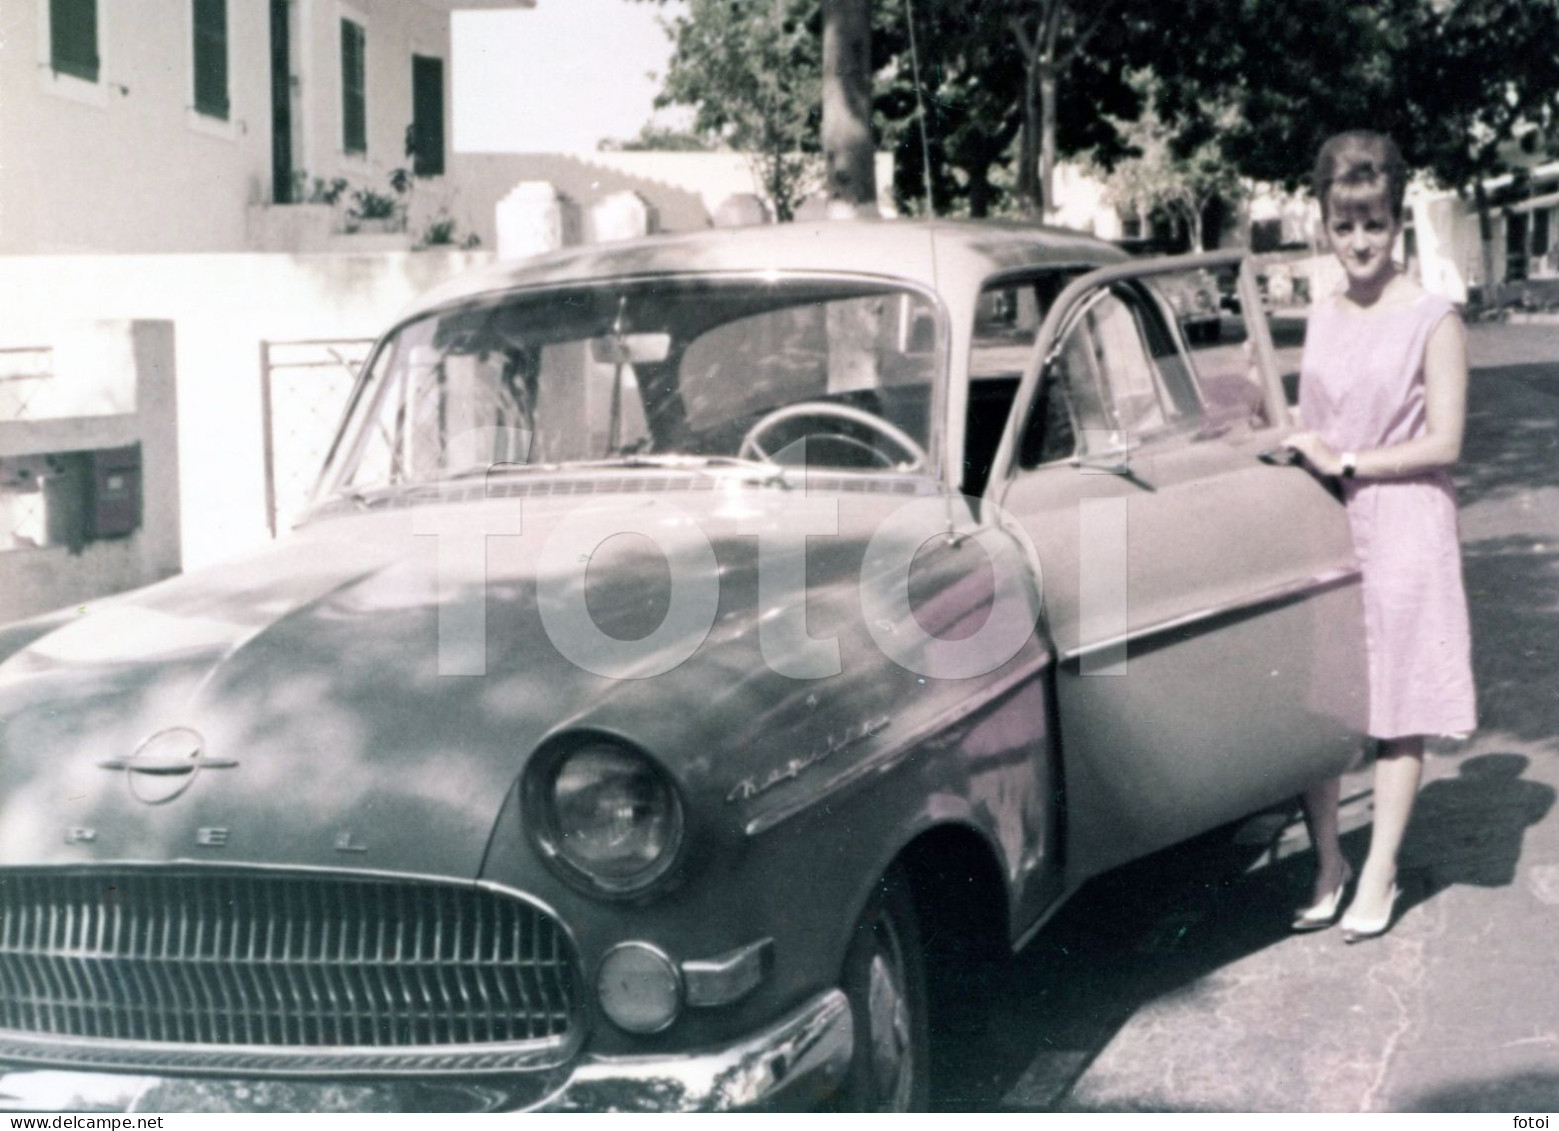 REAL PHOTO OPEL KAPITAN ANGOLA AFRICA AFRIQUE VOITURE CAR OLDTIMER AT518 - Africa